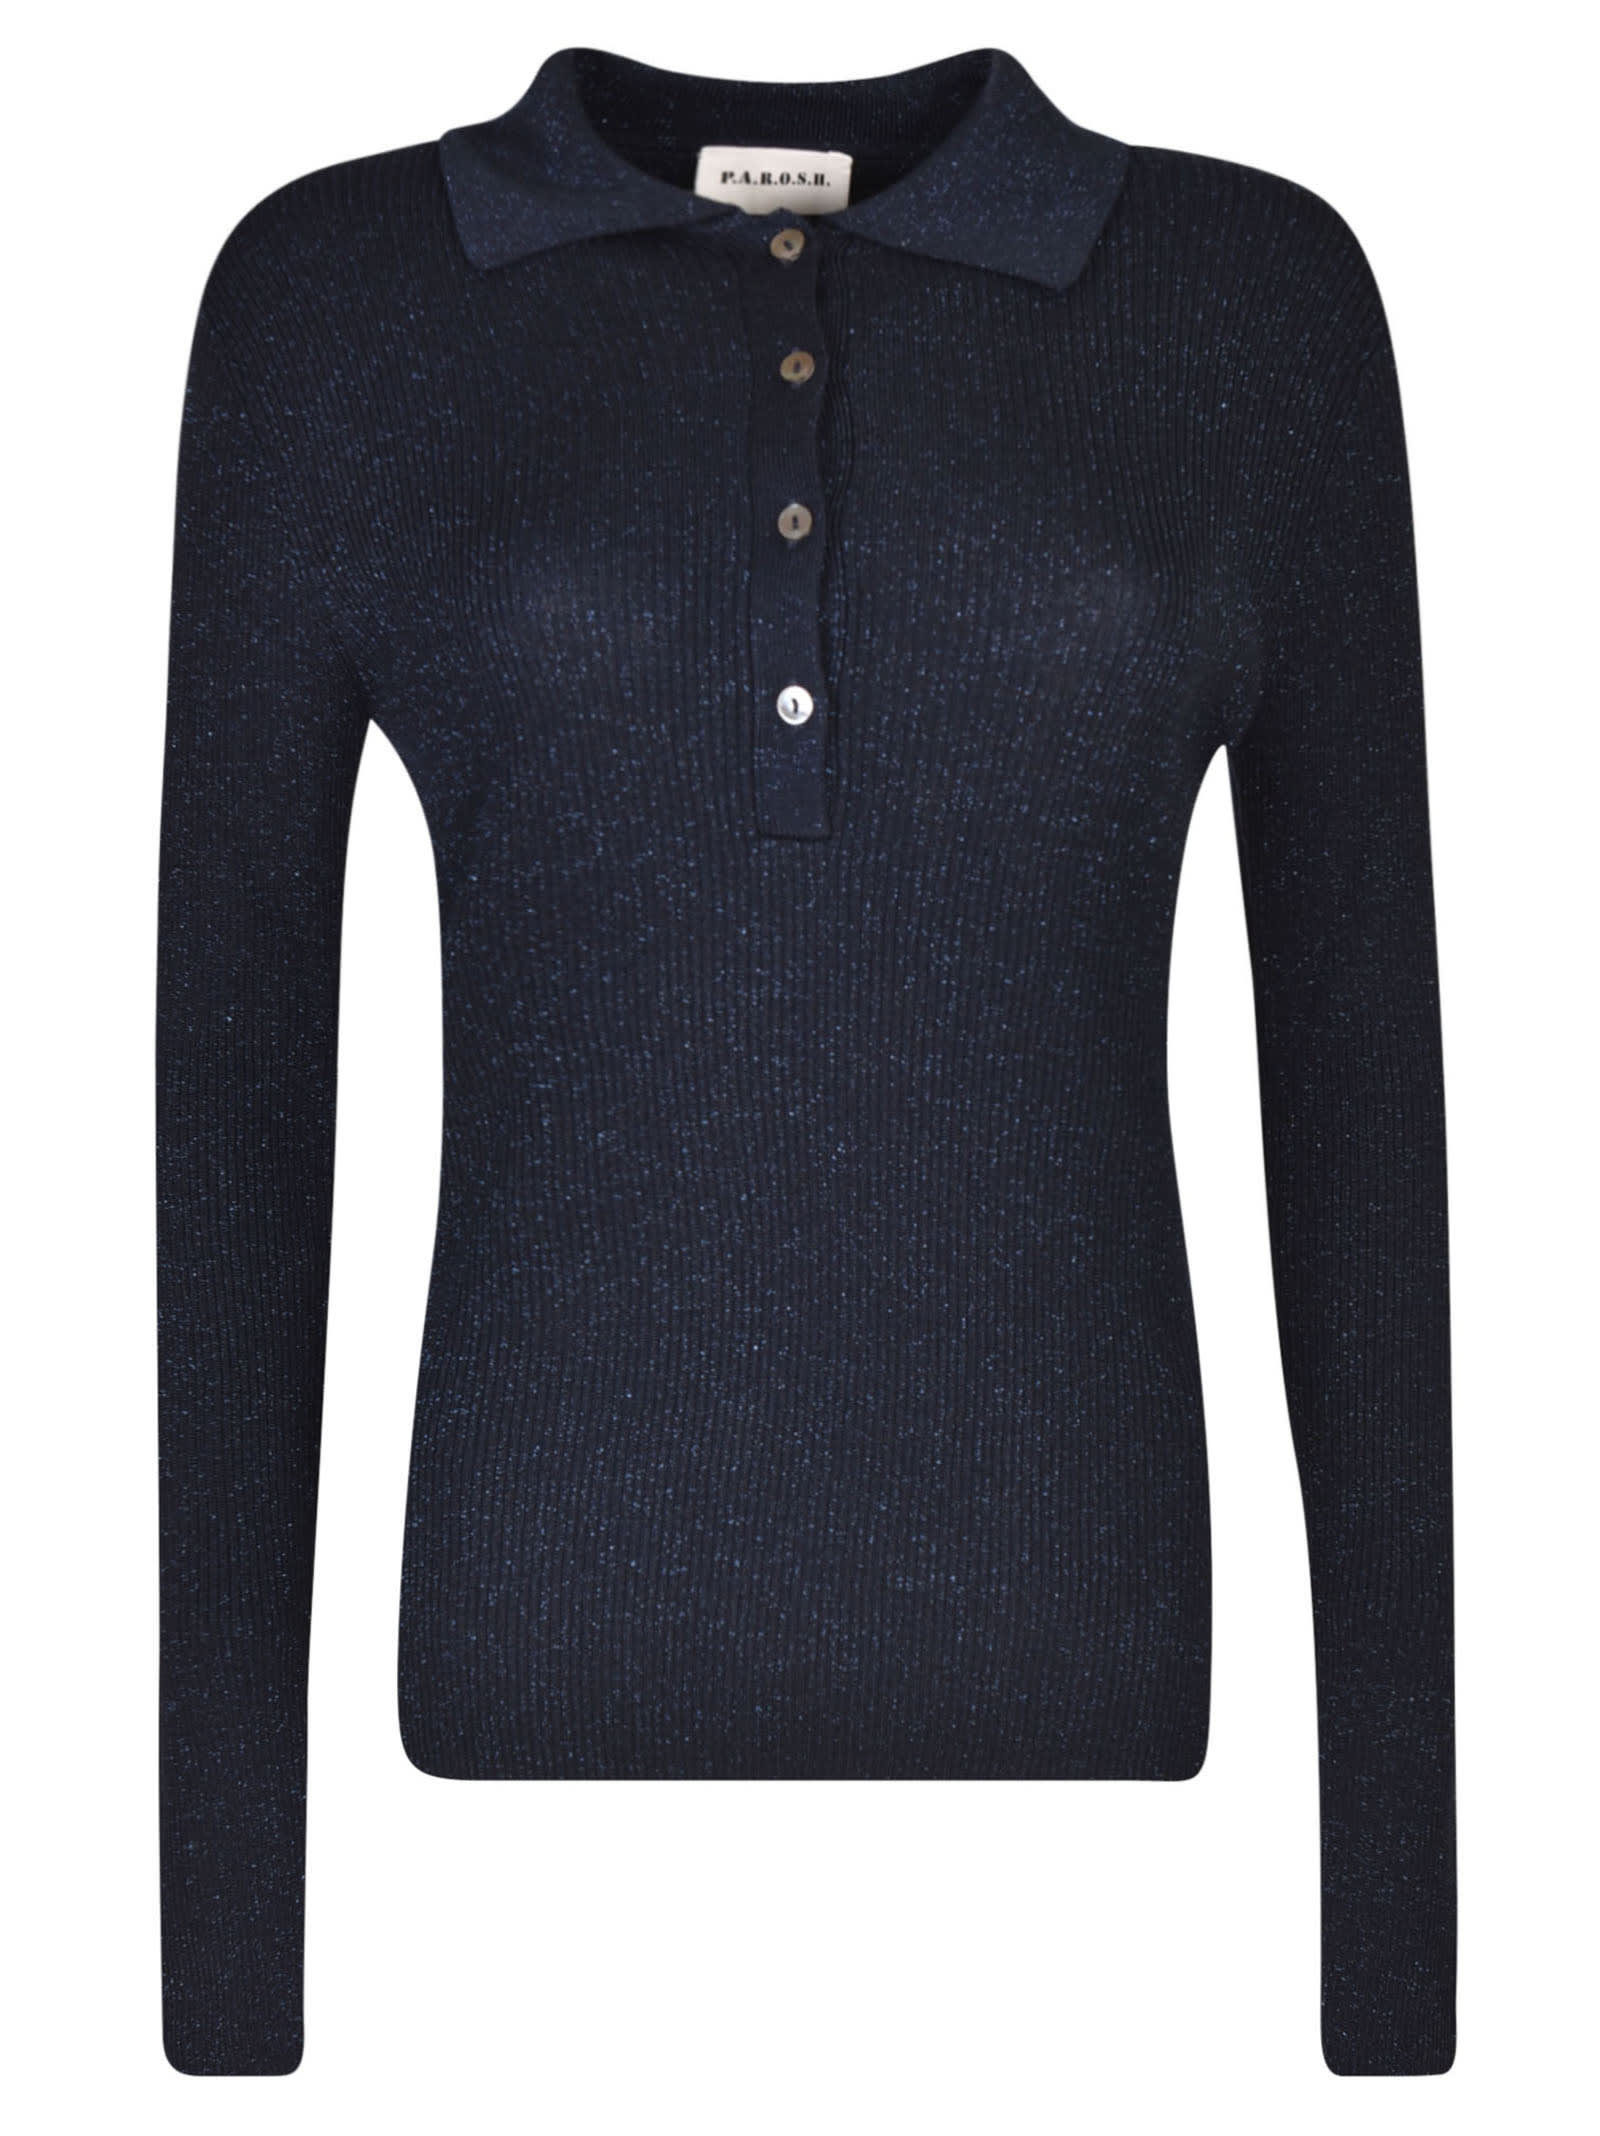 P.a.r.o.s.h Loulux Polo Shirt In Navy